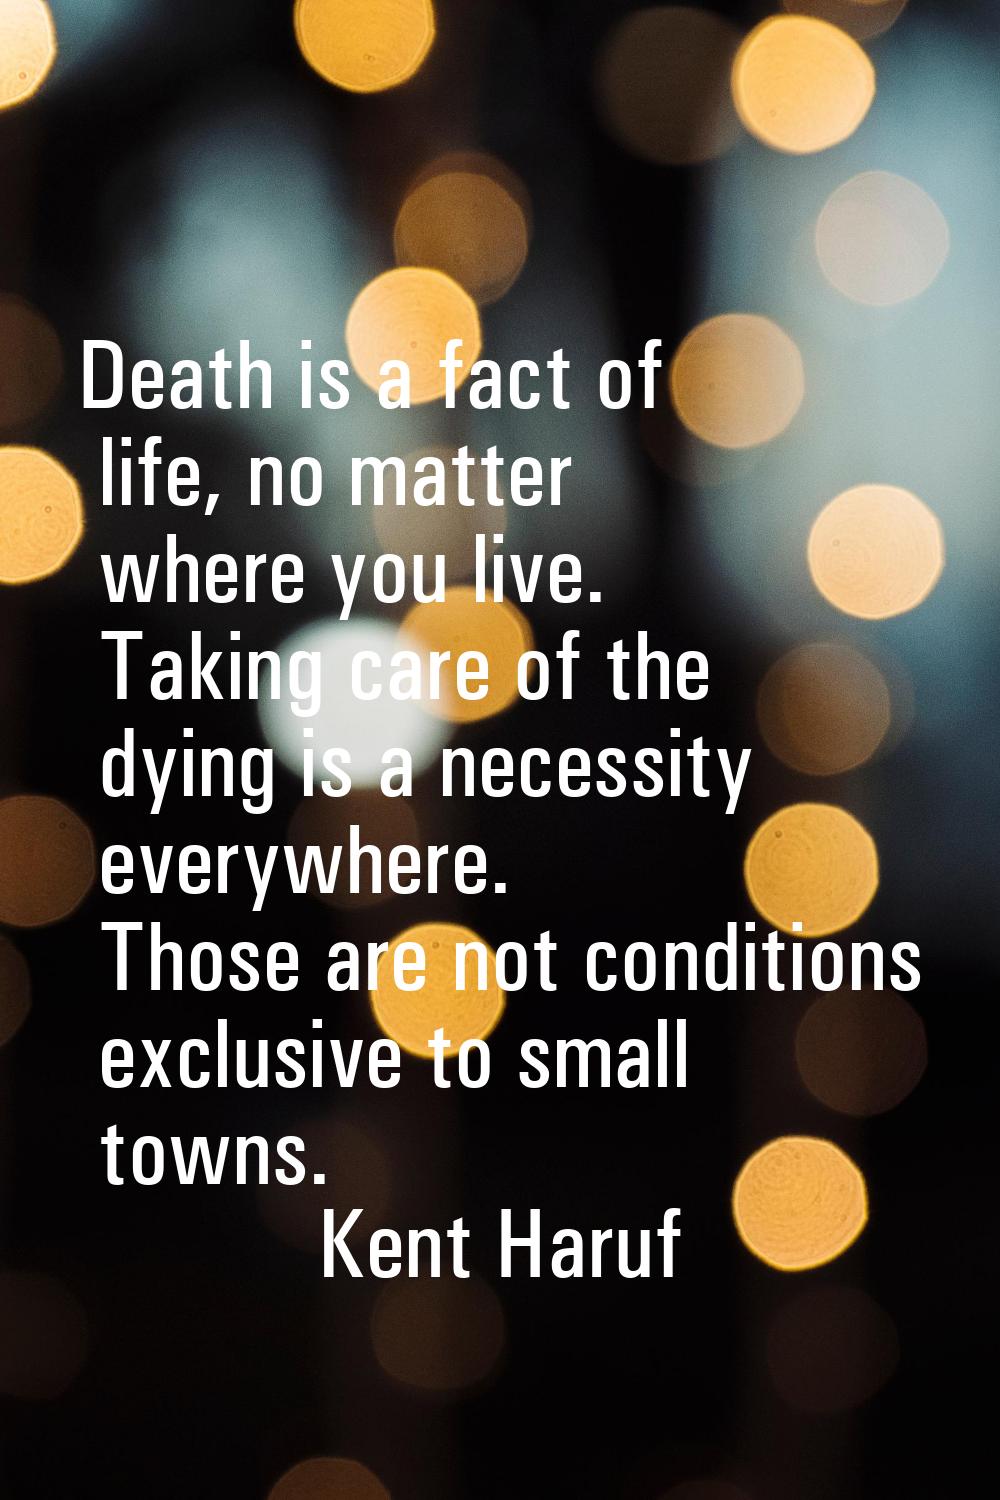 Death is a fact of life, no matter where you live. Taking care of the dying is a necessity everywhe